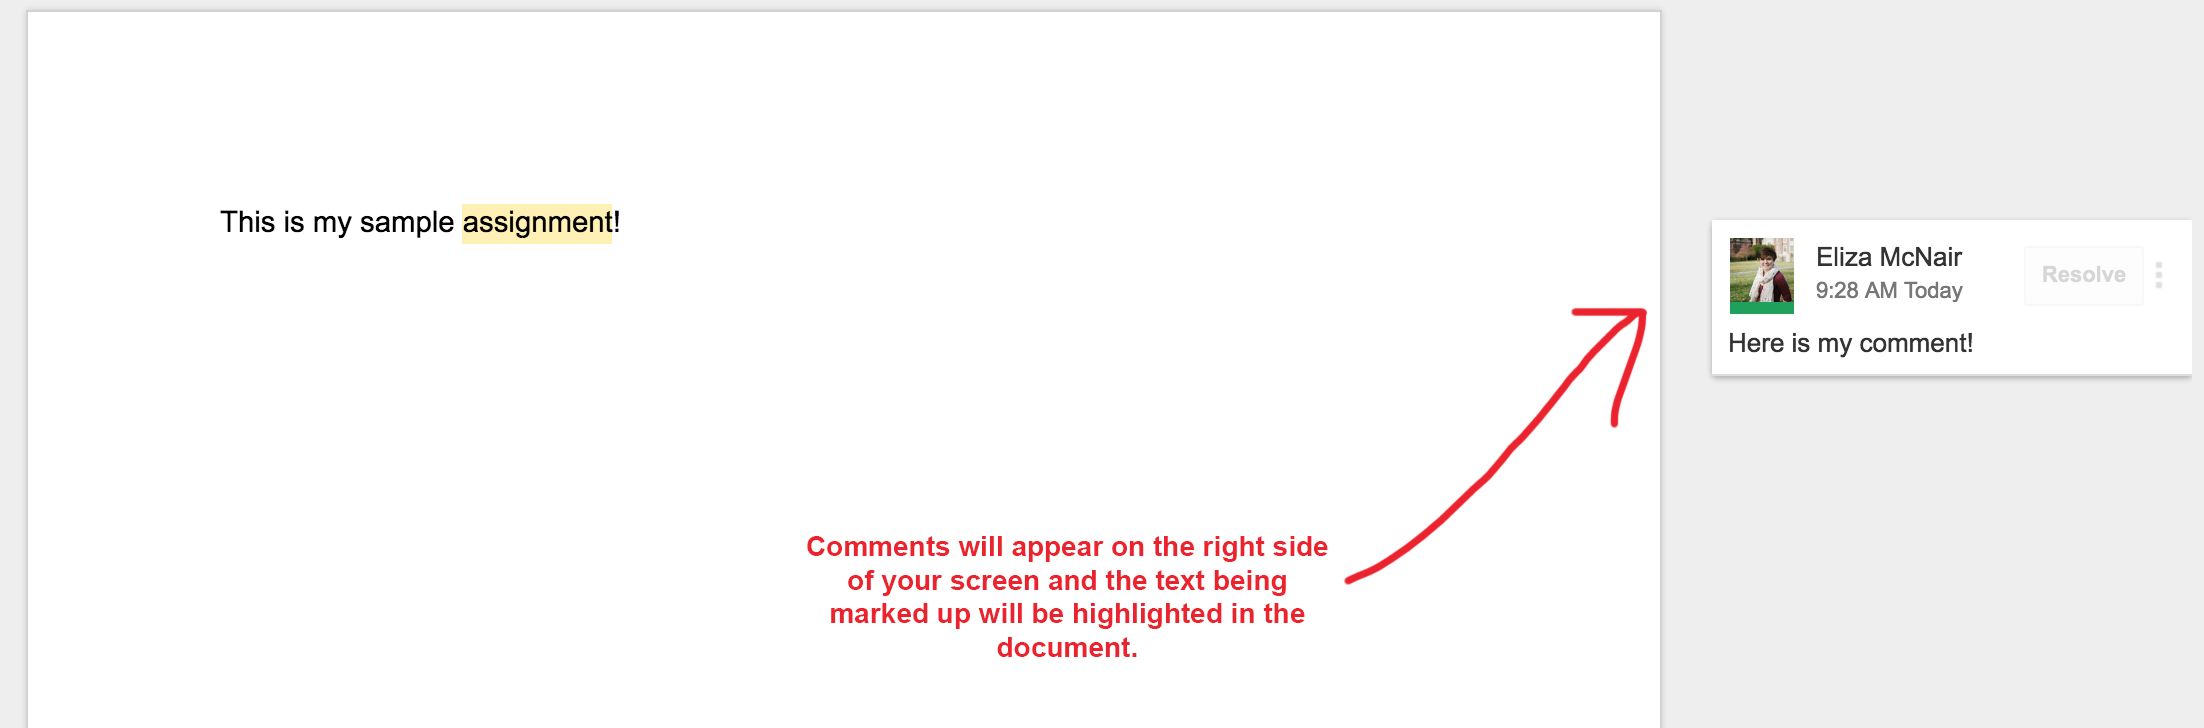 Screenshot of a comment added to a Google document.